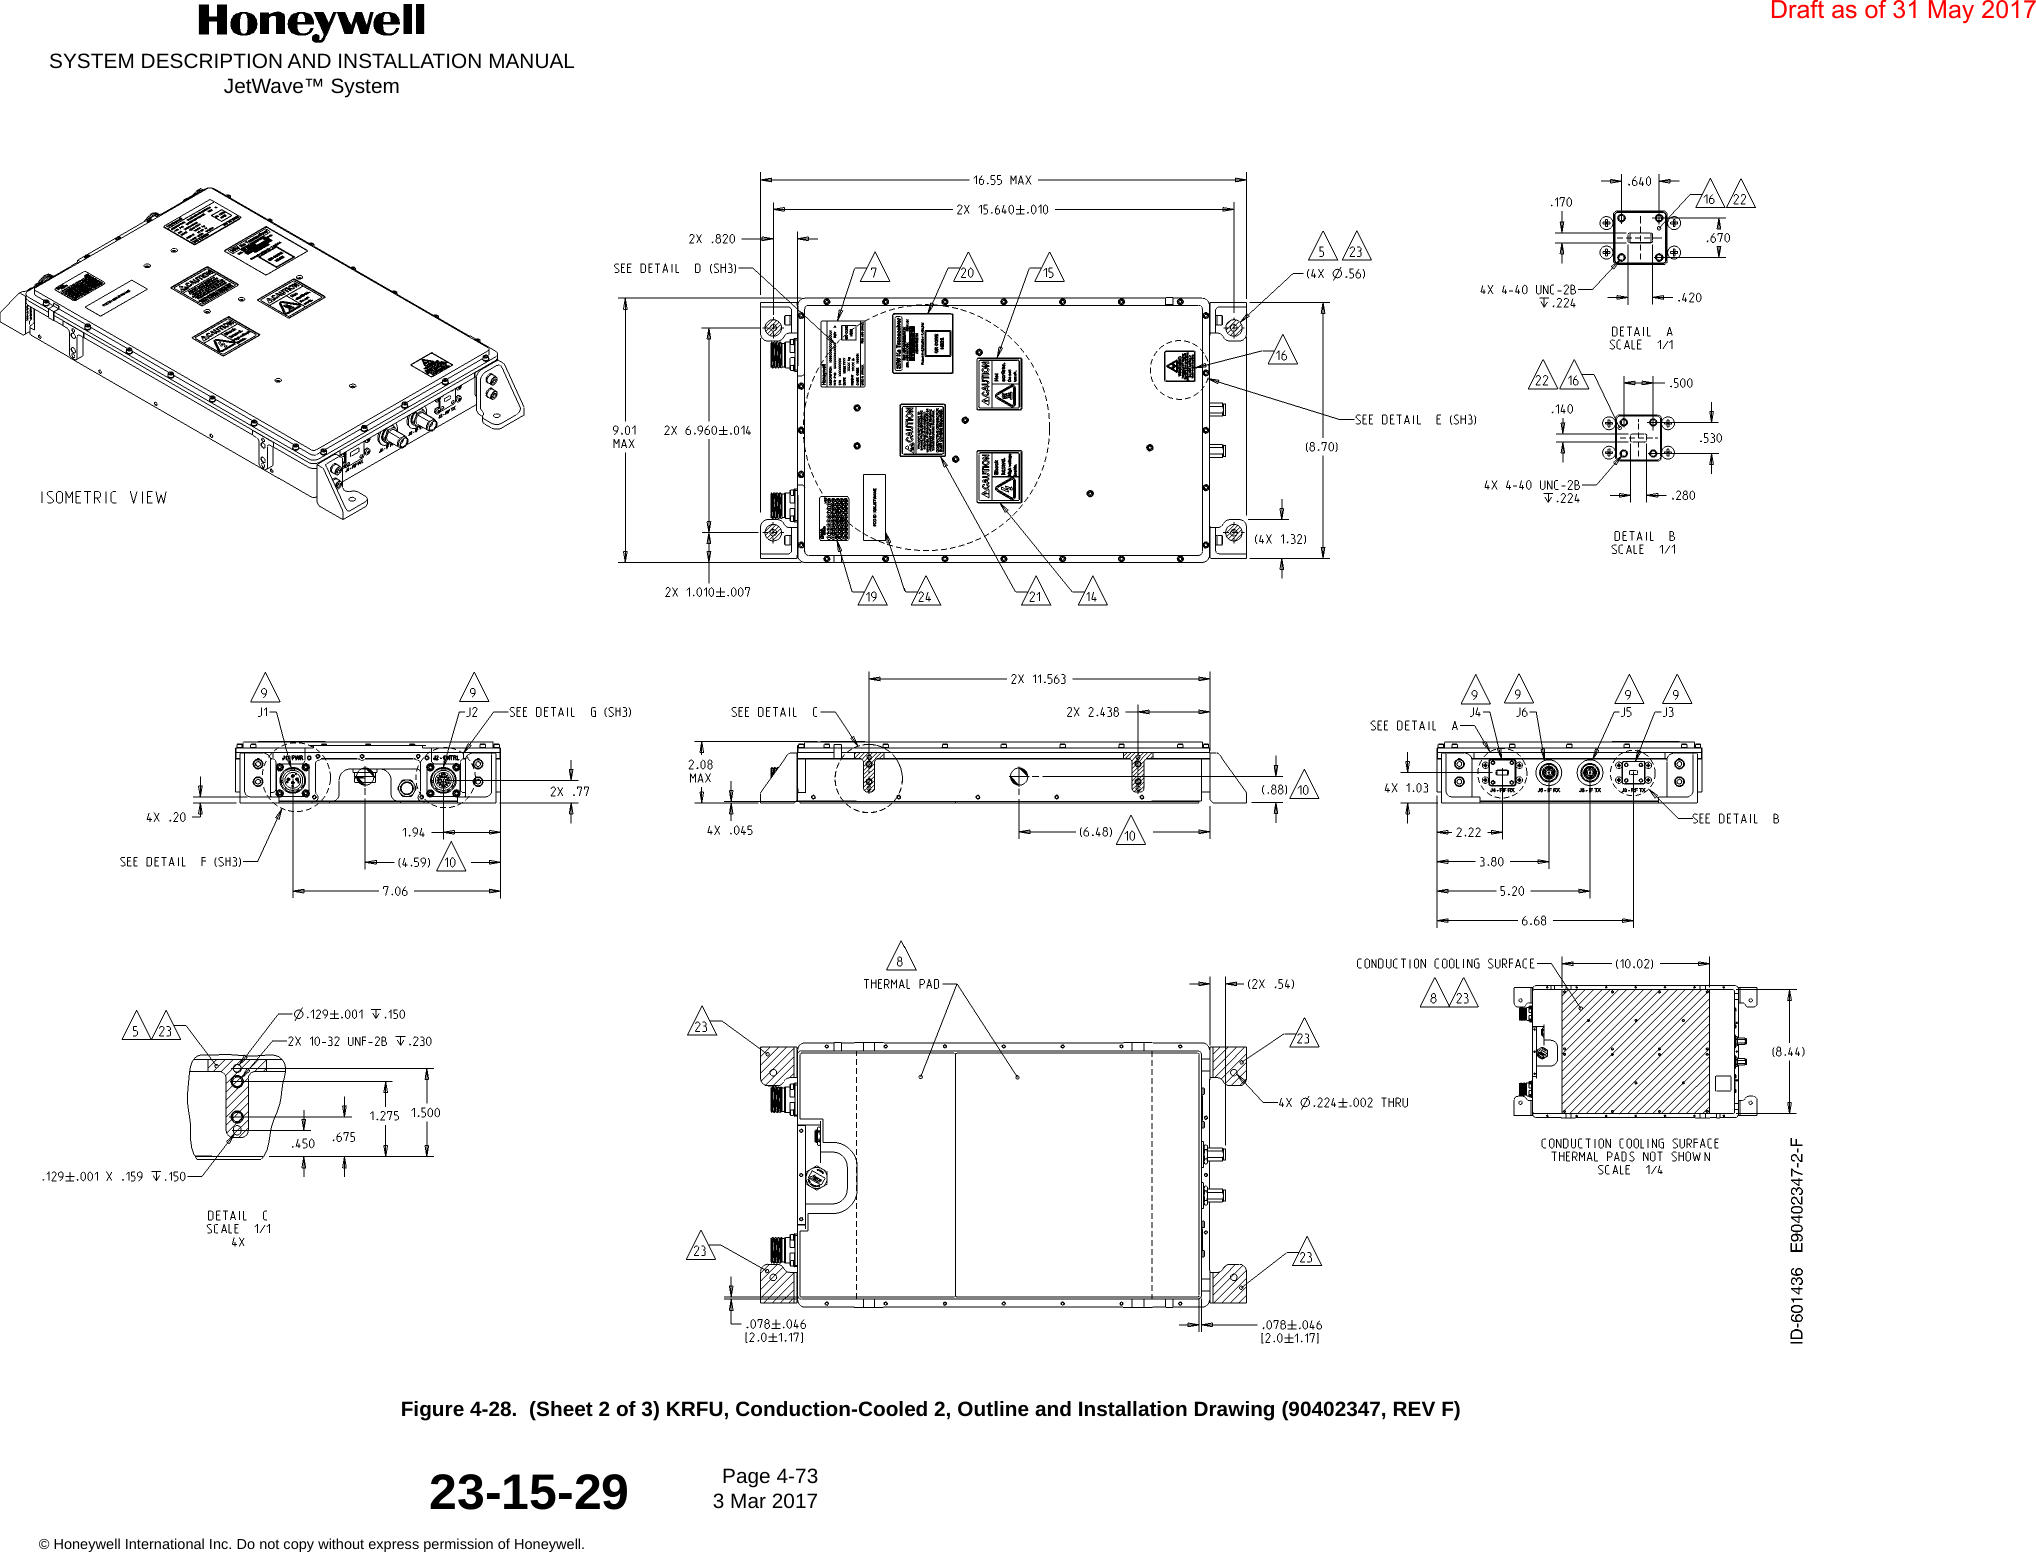 SYSTEM DESCRIPTION AND INSTALLATION MANUALJetWave™ SystemPage 4-73 3 Mar 2017© Honeywell International Inc. Do not copy without express permission of Honeywell.23-15-29Figure 4-28.  (Sheet 2 of 3) KRFU, Conduction-Cooled 2, Outline and Installation Drawing (90402347, REV F)Draft as of 31 May 2017